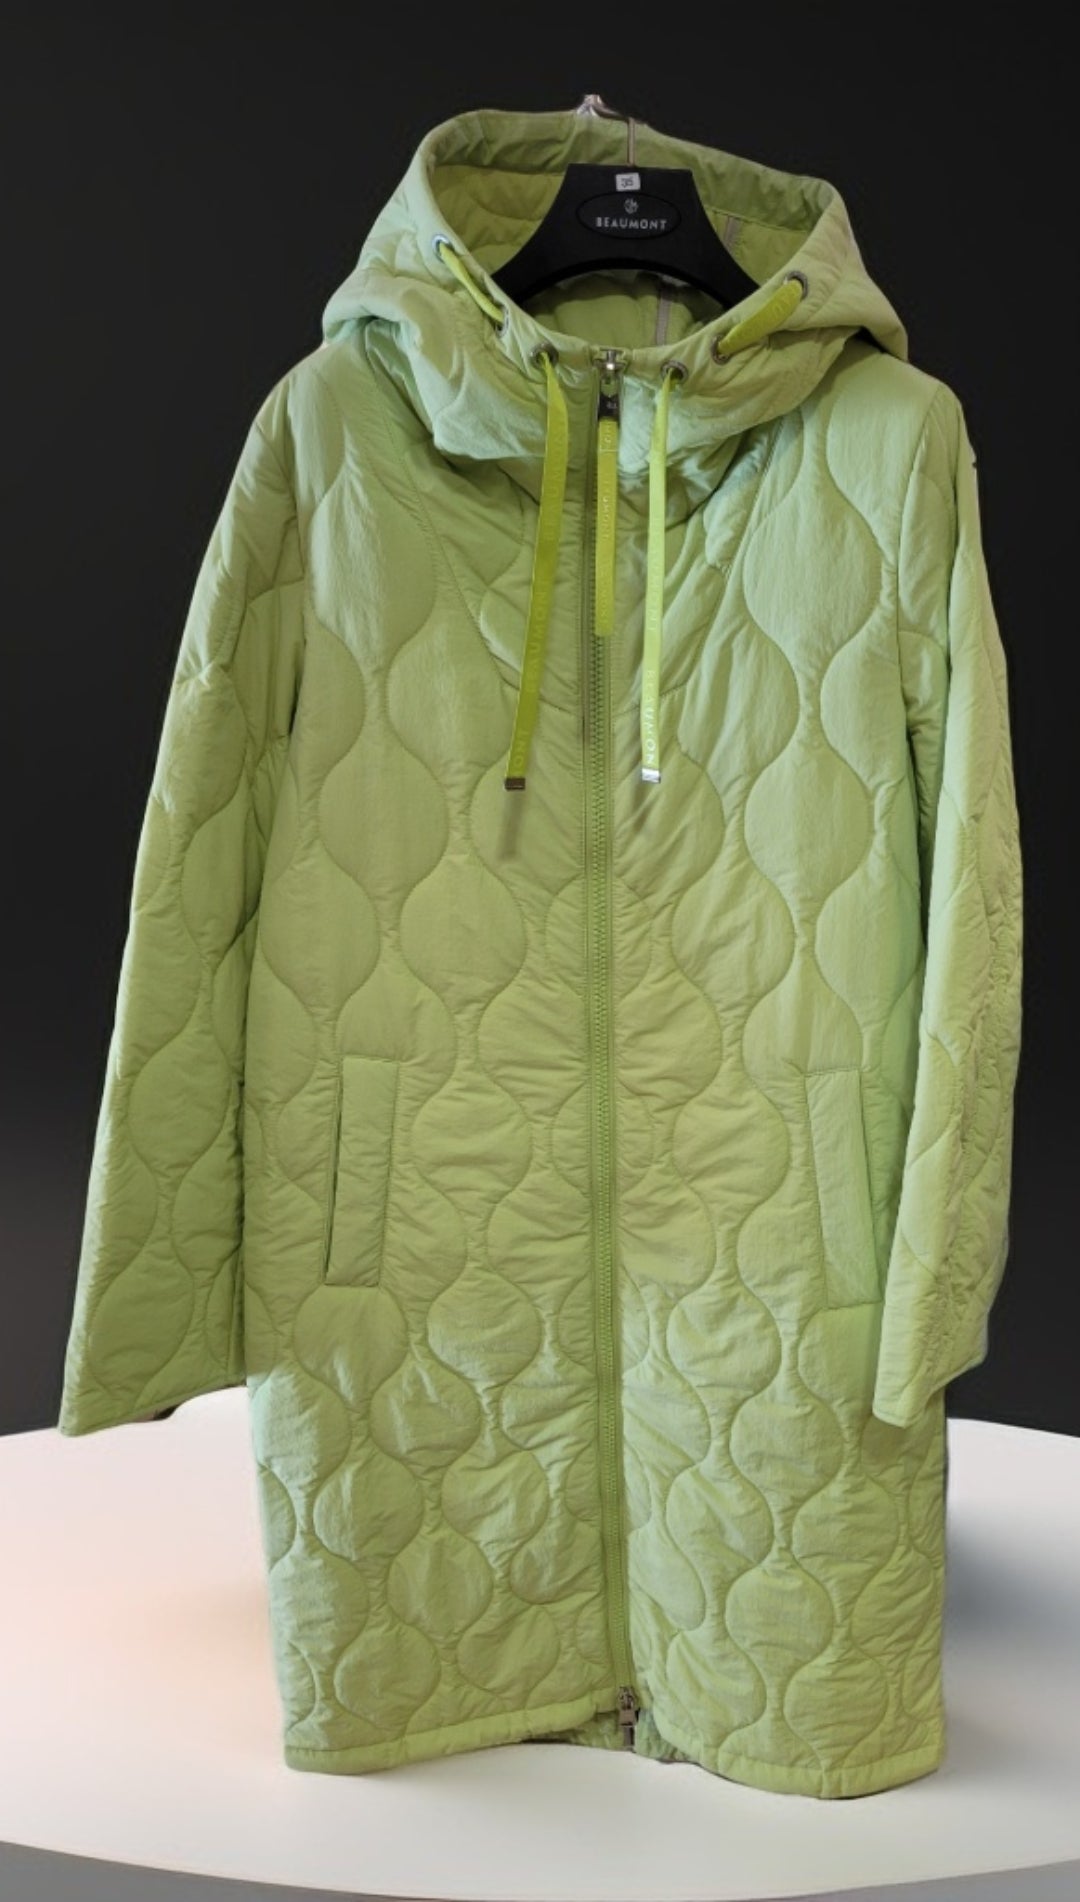 Beaumont quilted jacket